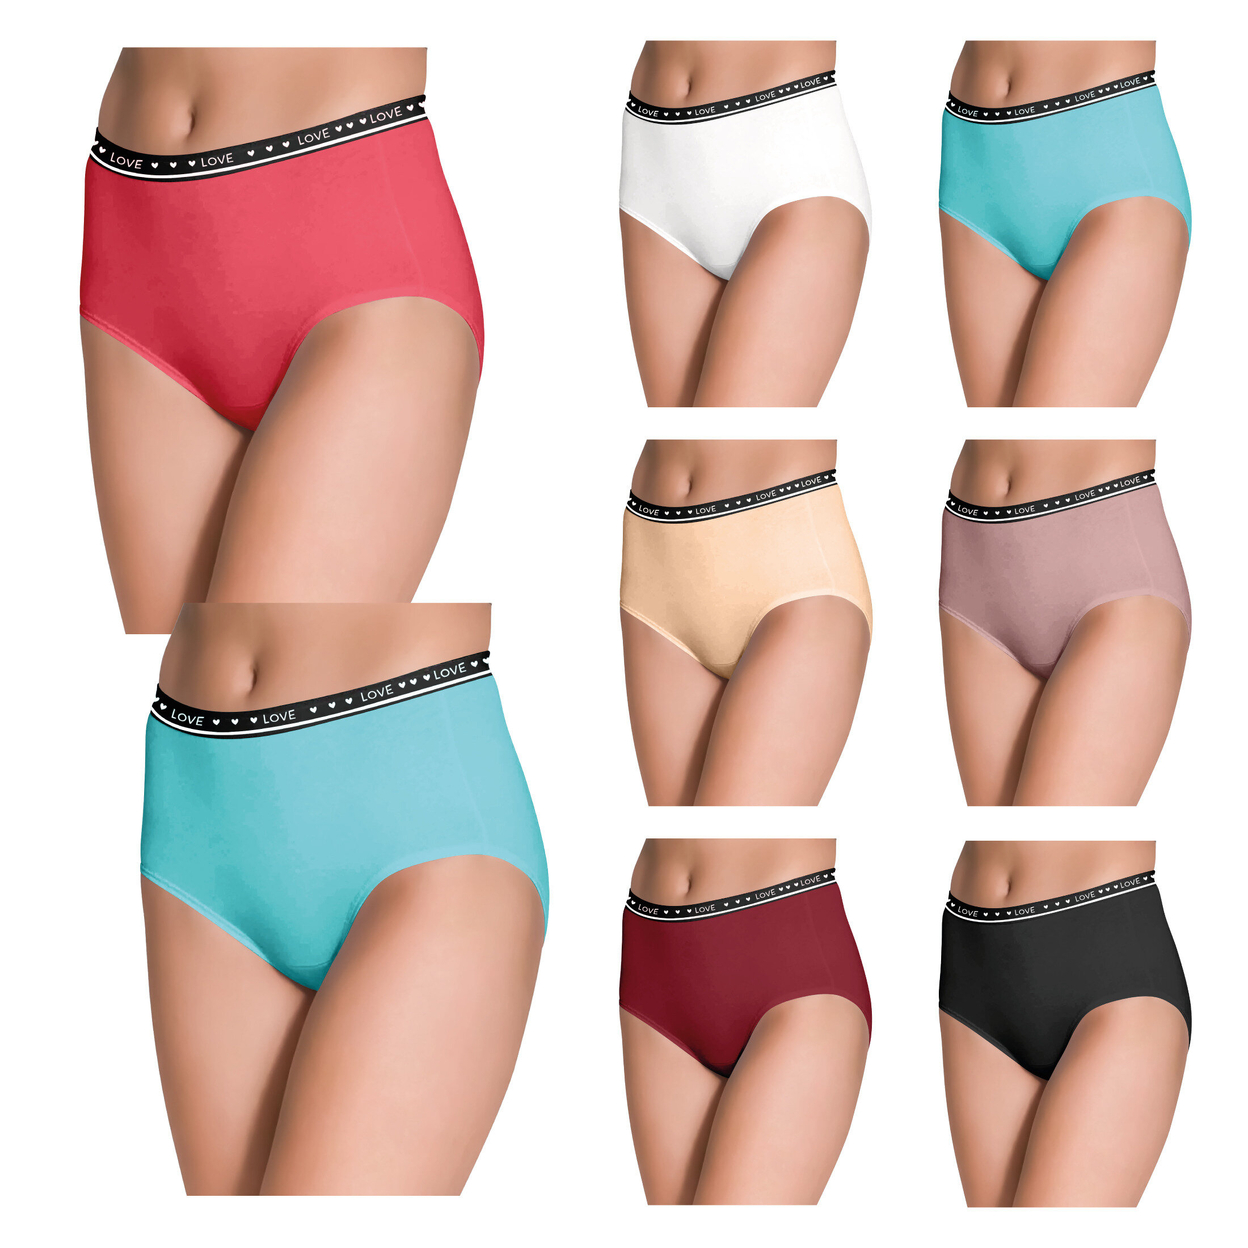 3-Pack: Women's Ultra Soft Moisture Wicking Panties Cotton Perfect Fit Underwear (Plus Sizes Available) - Large